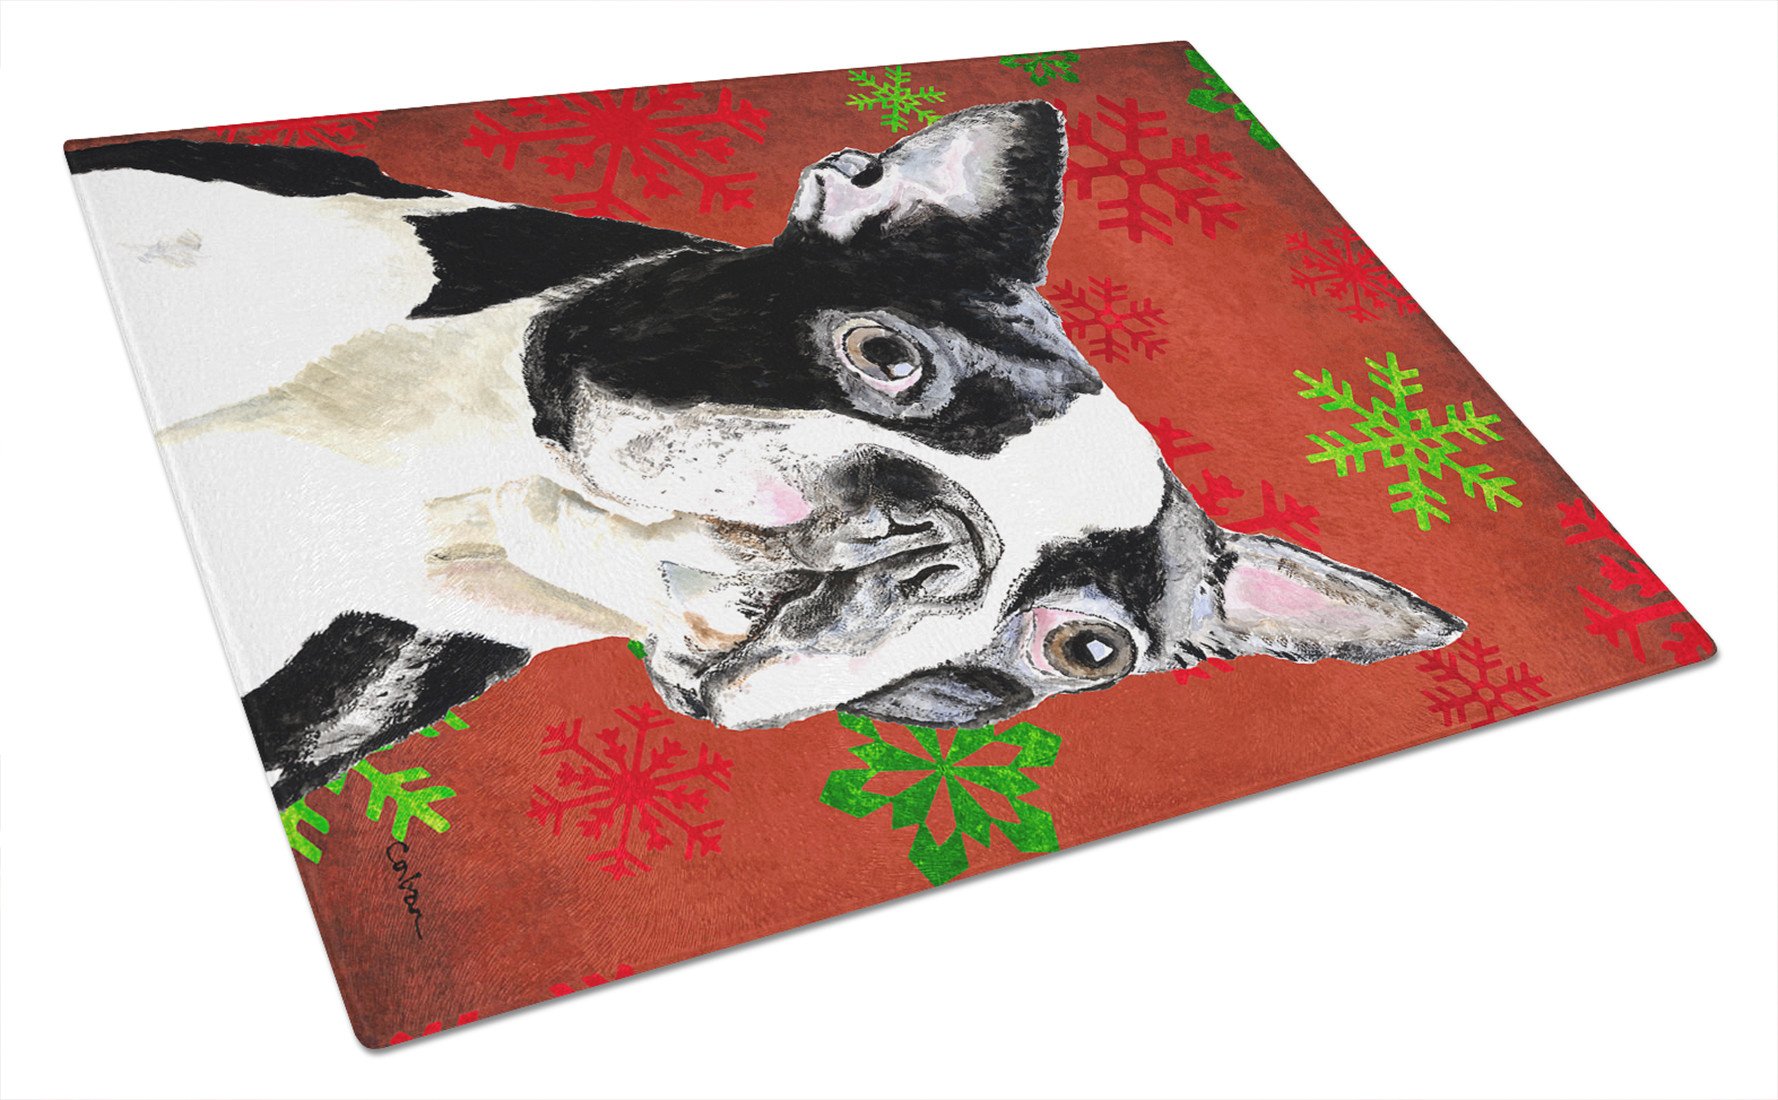 Boston Terrier Red and Green Snowflakes Christmas Glass Cutting Board Large by Caroline's Treasures